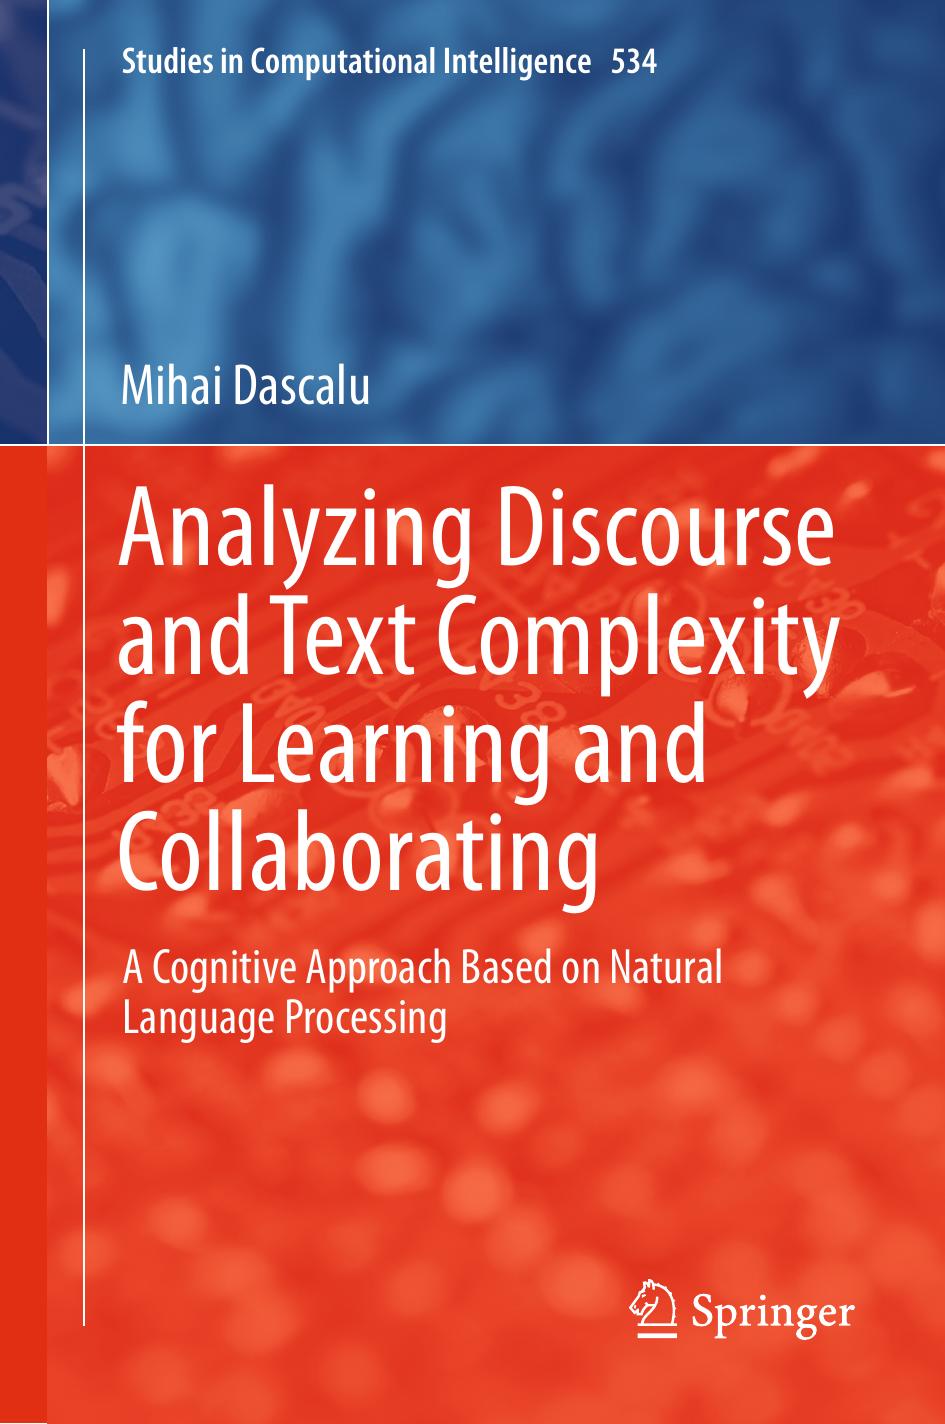 Analyzing Discourse and Text Complexity for Learning and Collaborating: A Cognitive Approach Based on Natural Language Processing